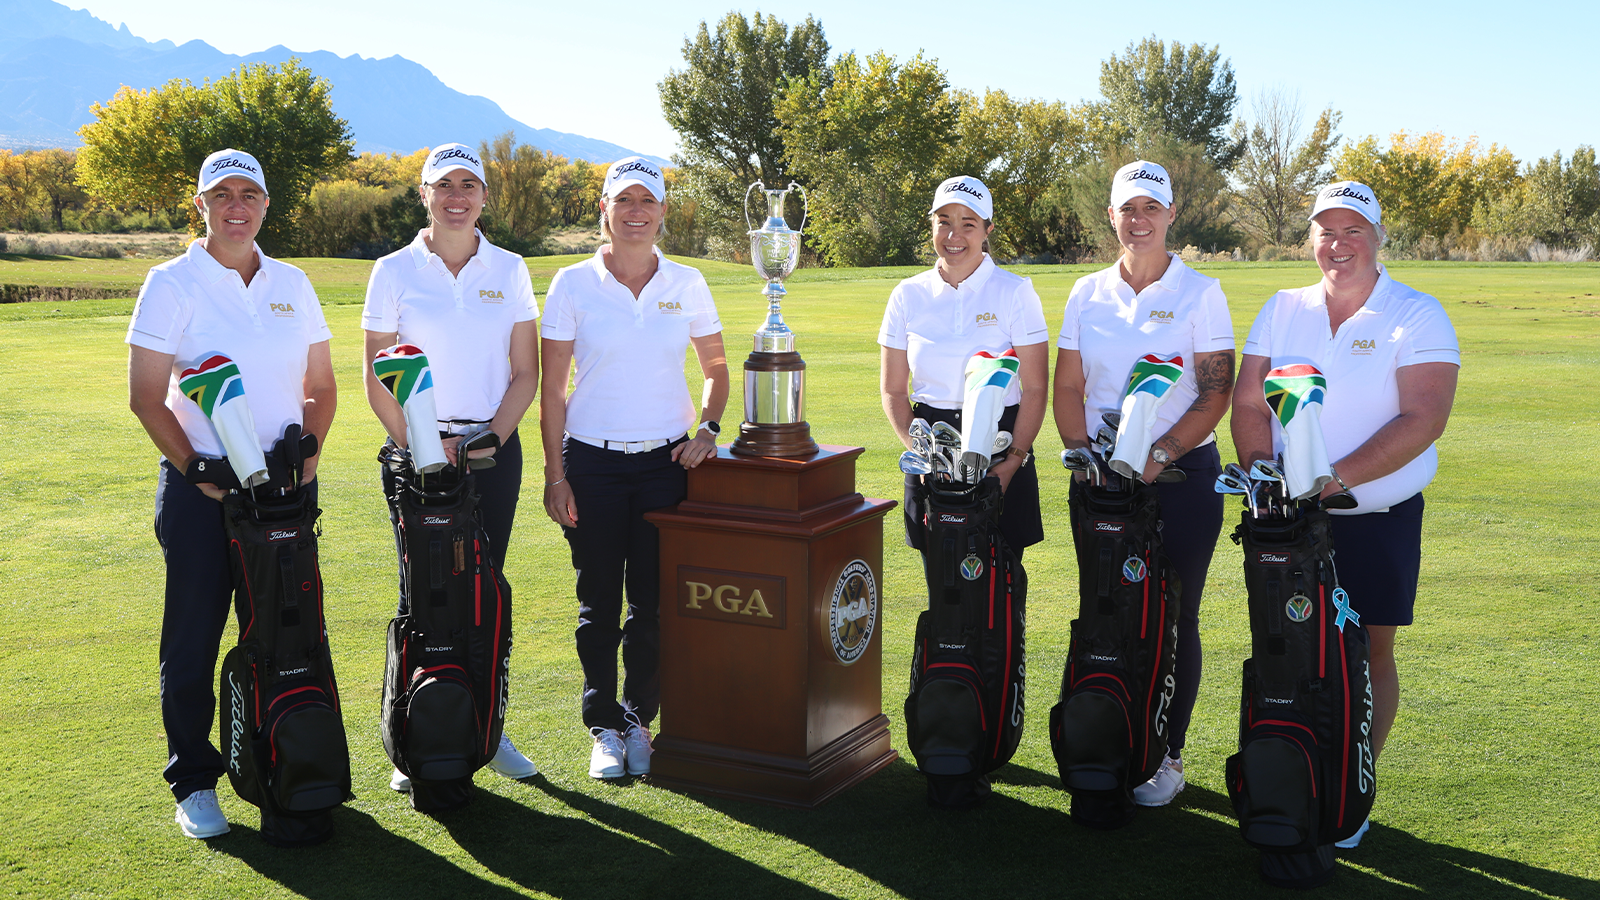 Rachel Howard, Nicole van Pletzen, Leigh-Jane Middleton, Liedeke de Klerk, Julie Bruyns Leach and Alet de Langen of Team South Africa pose for a photograph with the tournament trophy before the 2nd Women’s PGA Cup at Twin Warriors Golf Club on Wednesday, October 26, 2022 in Santa Ana Pueblo, New Mexico. (Photo by Sam Greenwood/PGA of America)